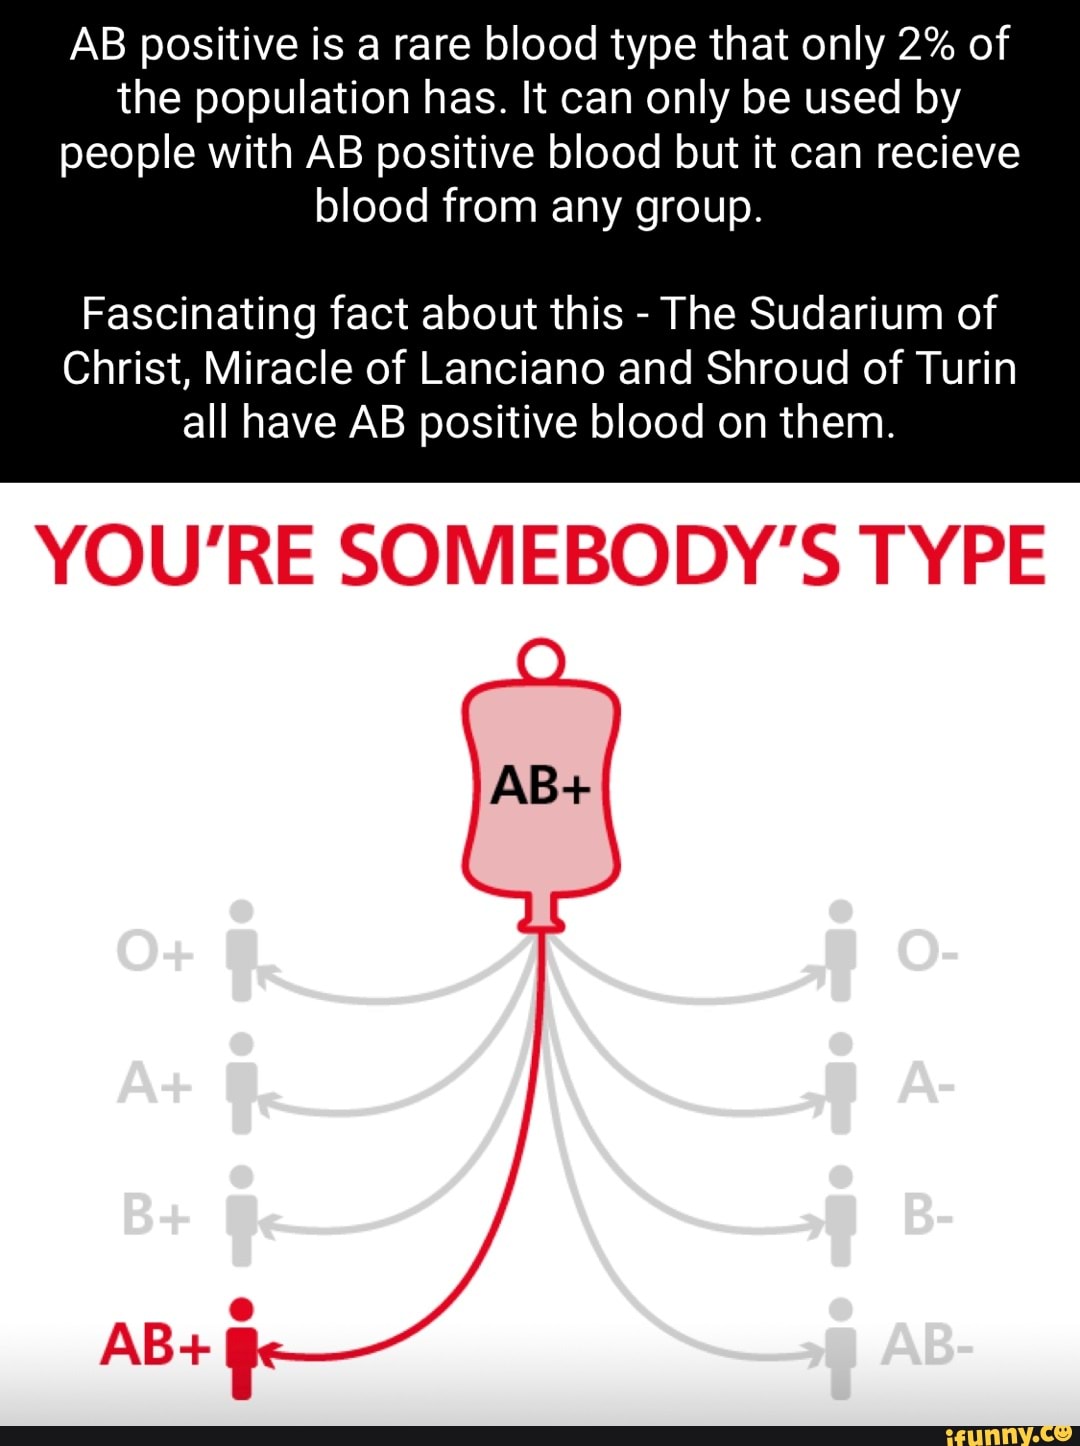 Overview of Different and Rare Blood Types